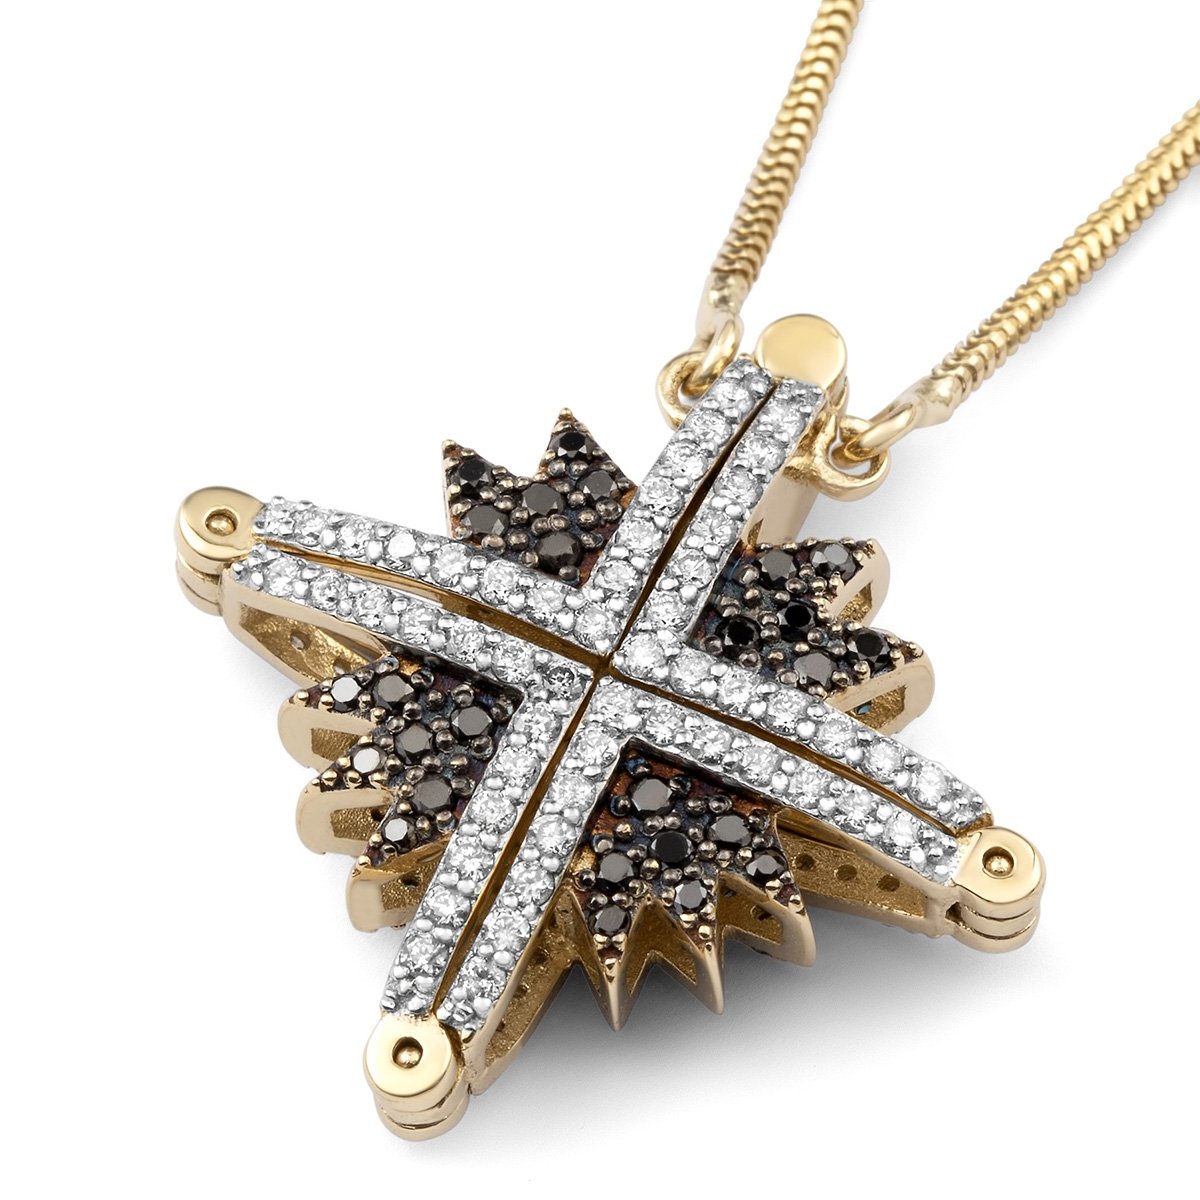 Anbinder Jewelry 14K Gold Double-Sided Star of Bethlehem Necklace with White, Blue & Black Diamonds - 1